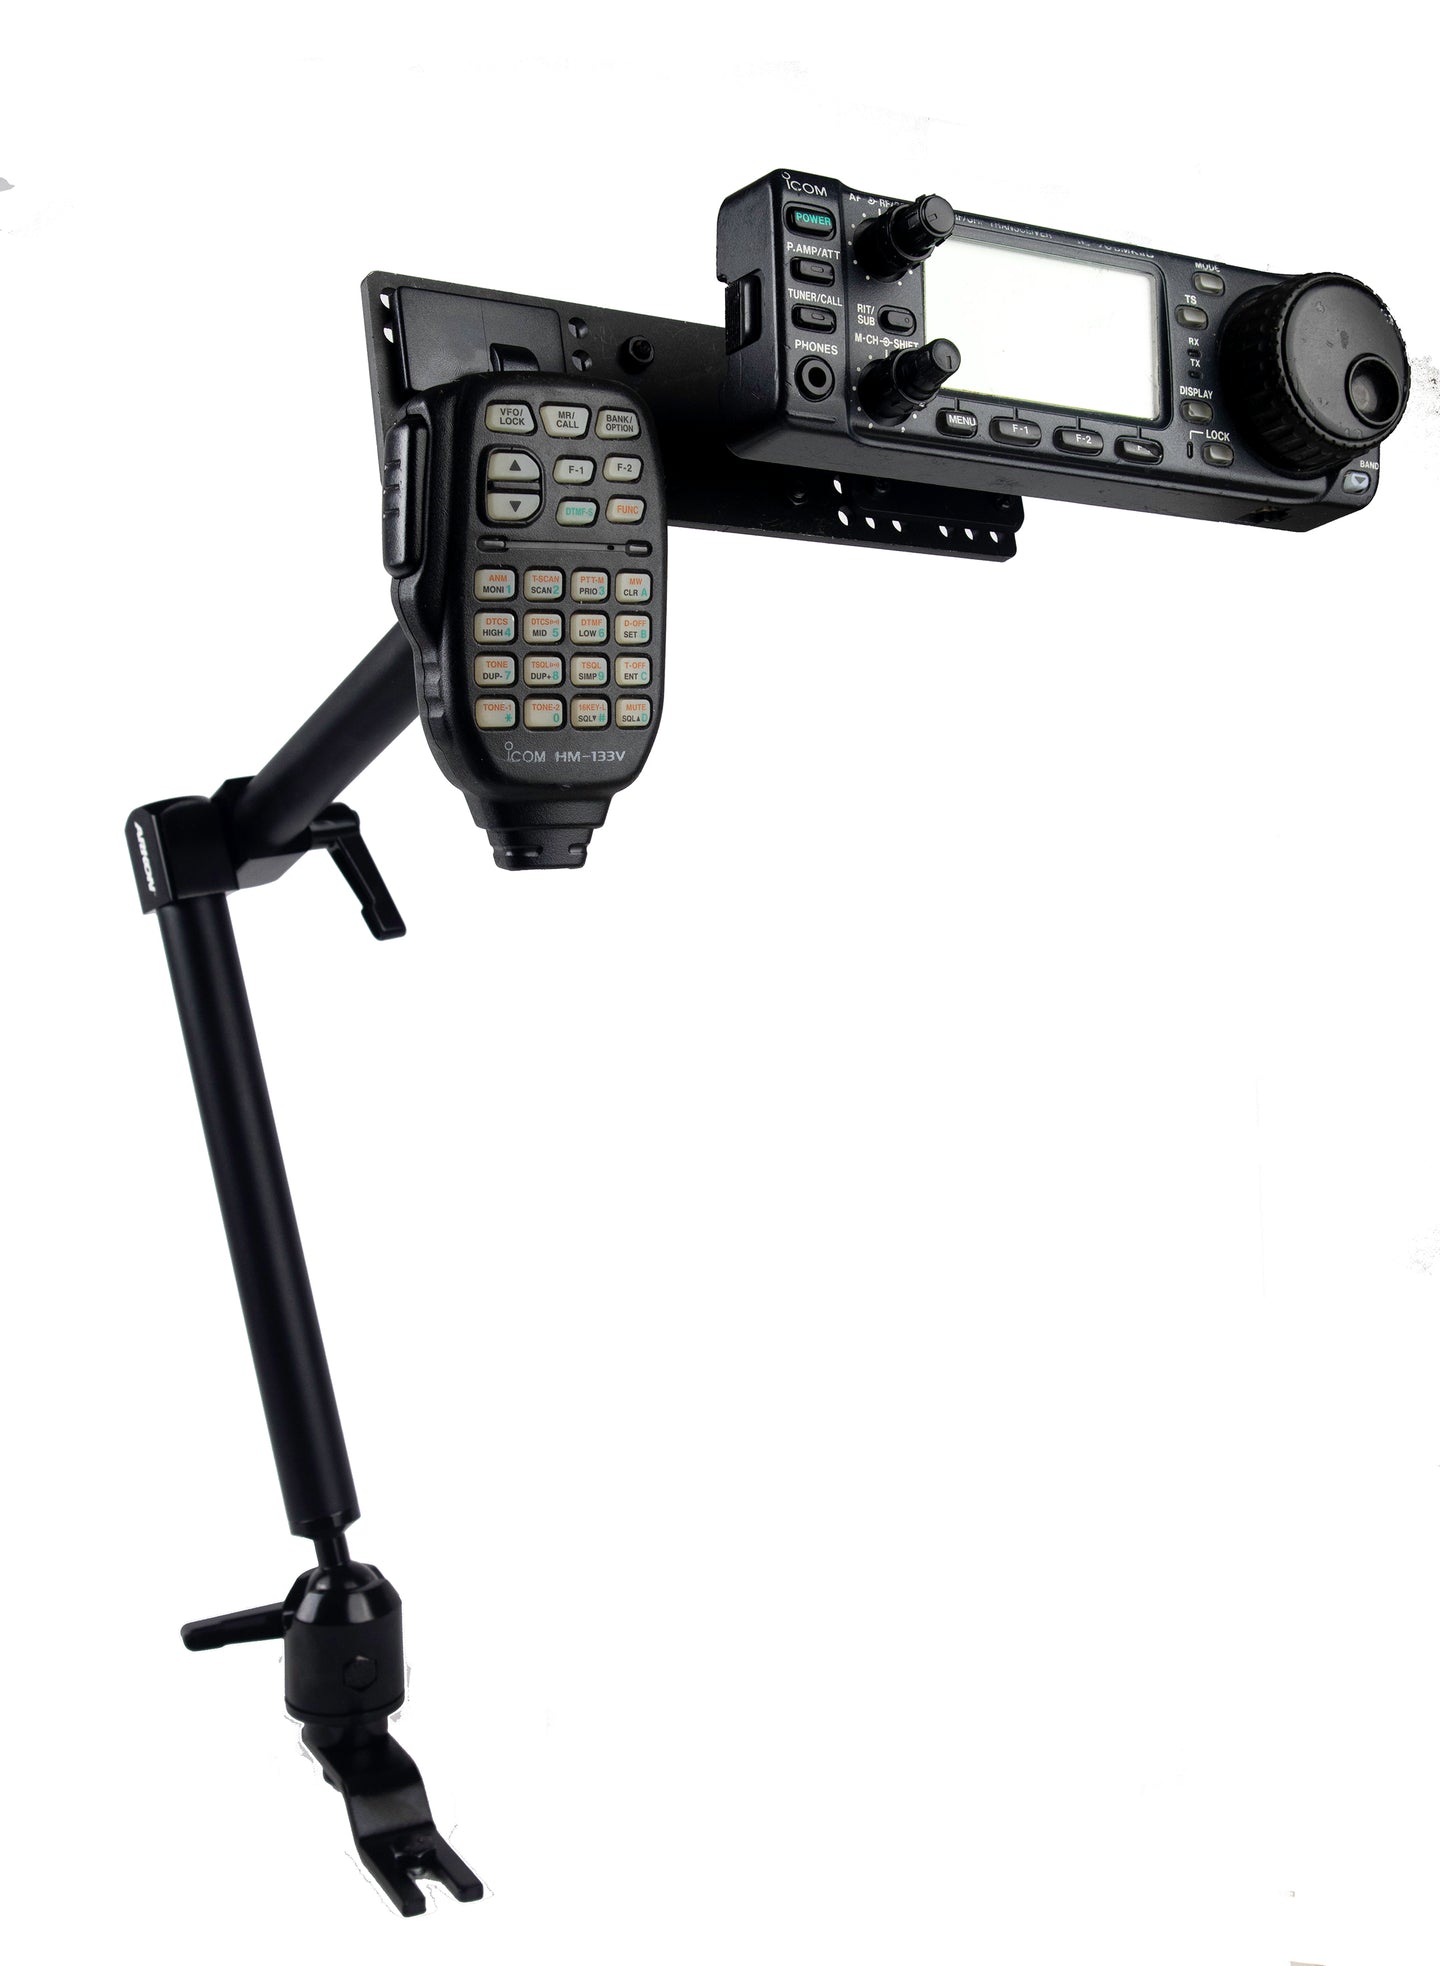 LM-300HD-EXT Low Vibration Seat Bolt Mount With Microphone Holder For Icom IC-706 IC-7000 IC-7100 IC-2820 ID-880 ID-4100